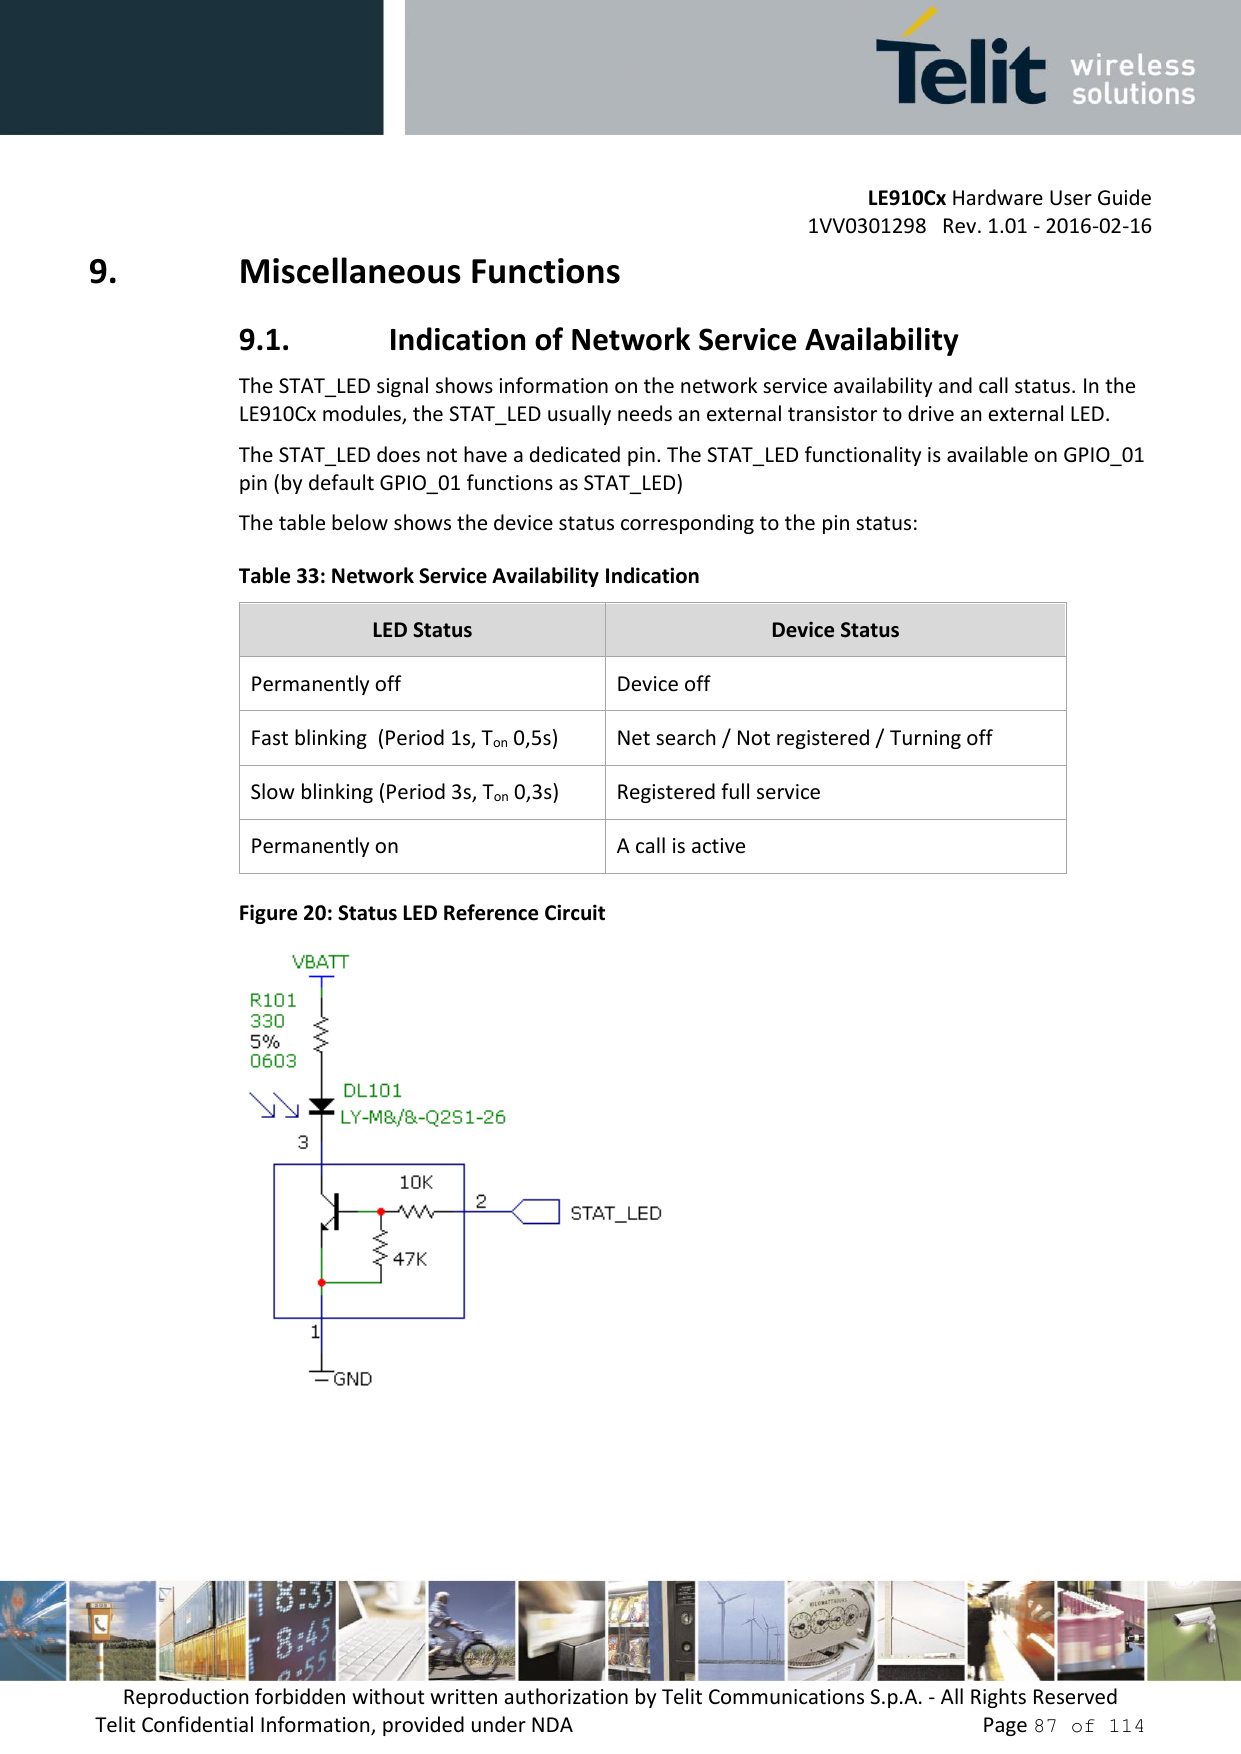         LE910Cx Hardware User Guide     1VV0301298   Rev. 1.01 - 2016-02-16 Reproduction forbidden without written authorization by Telit Communications S.p.A. - All Rights Reserved Telit Confidential Information, provided under NDA                 Page 87 of 114 9. Miscellaneous Functions 9.1. Indication of Network Service Availability The STAT_LED signal shows information on the network service availability and call status. In the LE910Cx modules, the STAT_LED usually needs an external transistor to drive an external LED. The STAT_LED does not have a dedicated pin. The STAT_LED functionality is available on GPIO_01 pin (by default GPIO_01 functions as STAT_LED) The table below shows the device status corresponding to the pin status: Table 33: Network Service Availability Indication LED Status Device Status Permanently off Device off Fast blinking  (Period 1s, Ton 0,5s) Net search / Not registered / Turning off Slow blinking (Period 3s, Ton 0,3s) Registered full service Permanently on A call is active Figure 20: Status LED Reference Circuit       